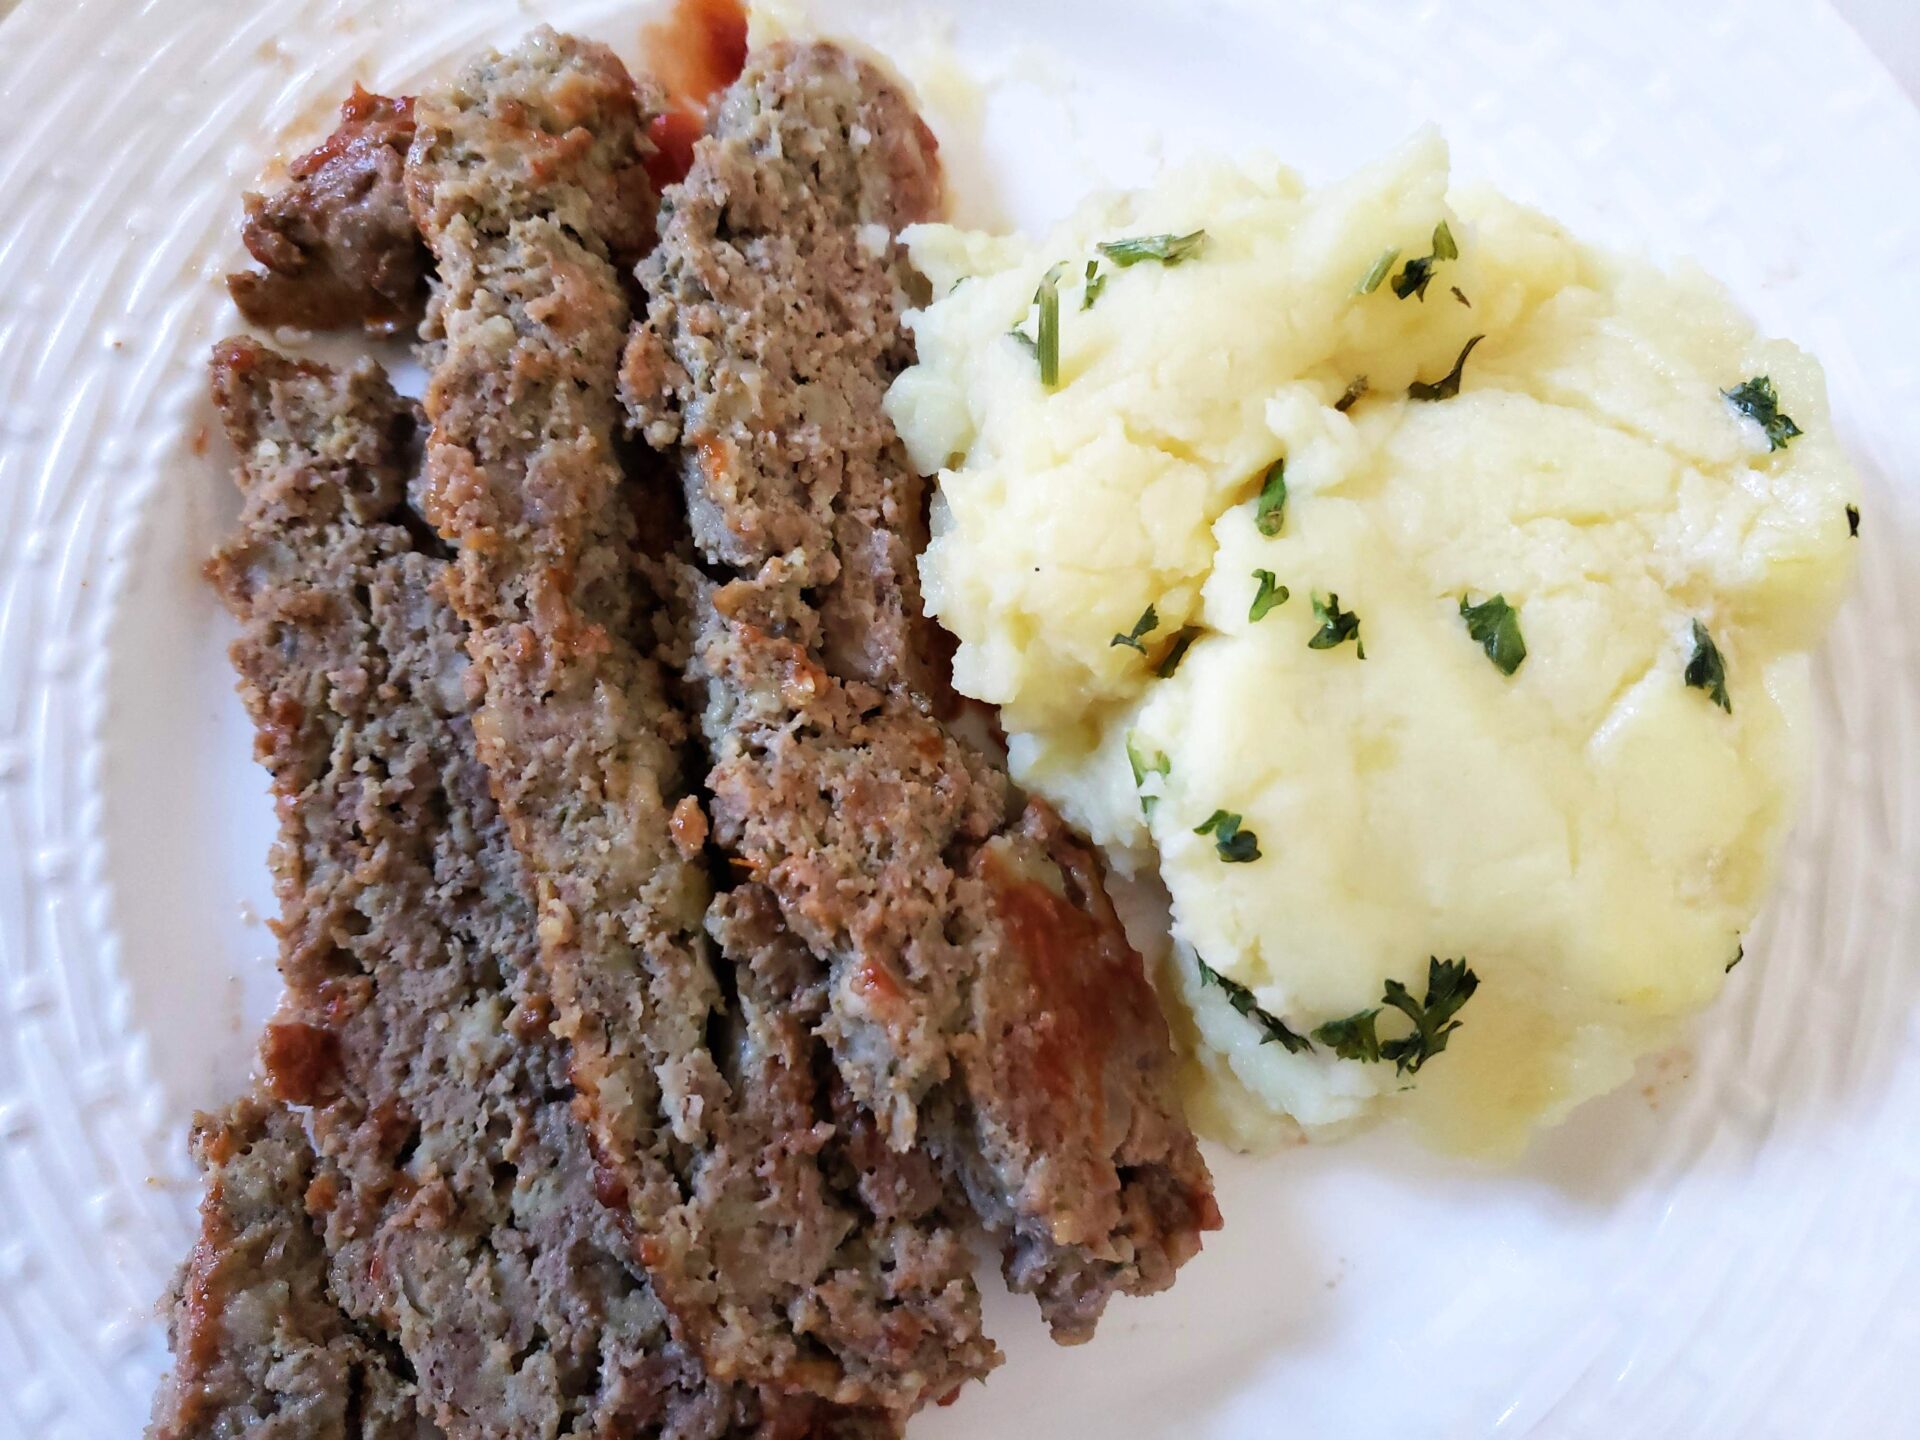 Costco-Meatloaf-and-Mashed-Potatoes-Meal